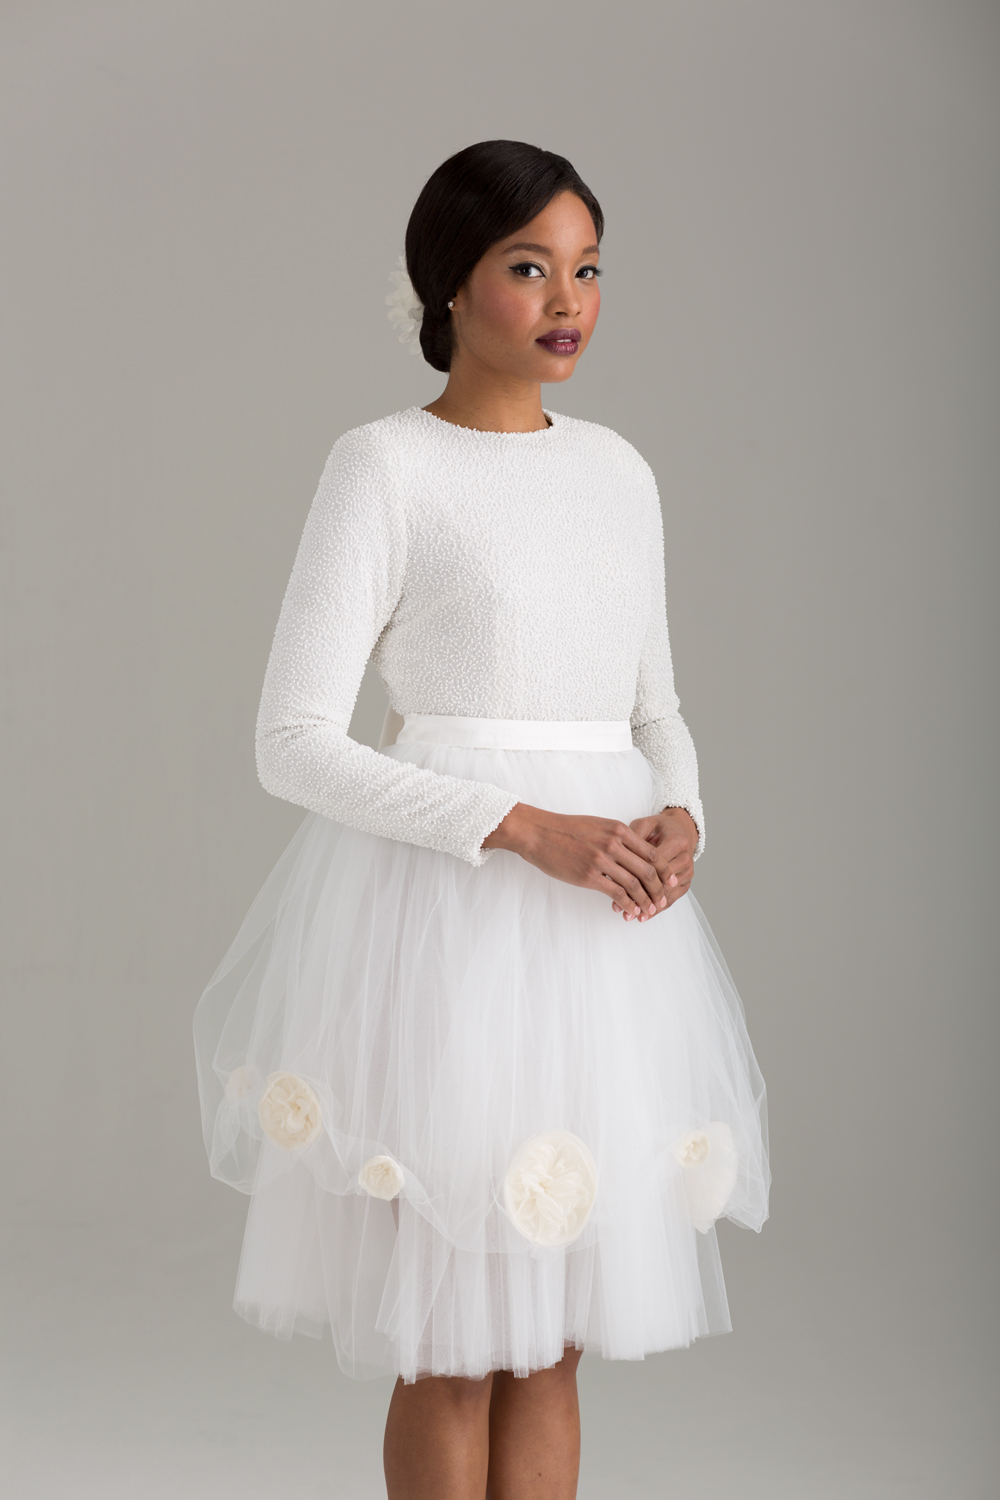    NKB17-81003    "Caryophyllales" White Beaded Top with Cut Out Back &amp;  NKB17-83002  "Peony" White Tulle Skirt  